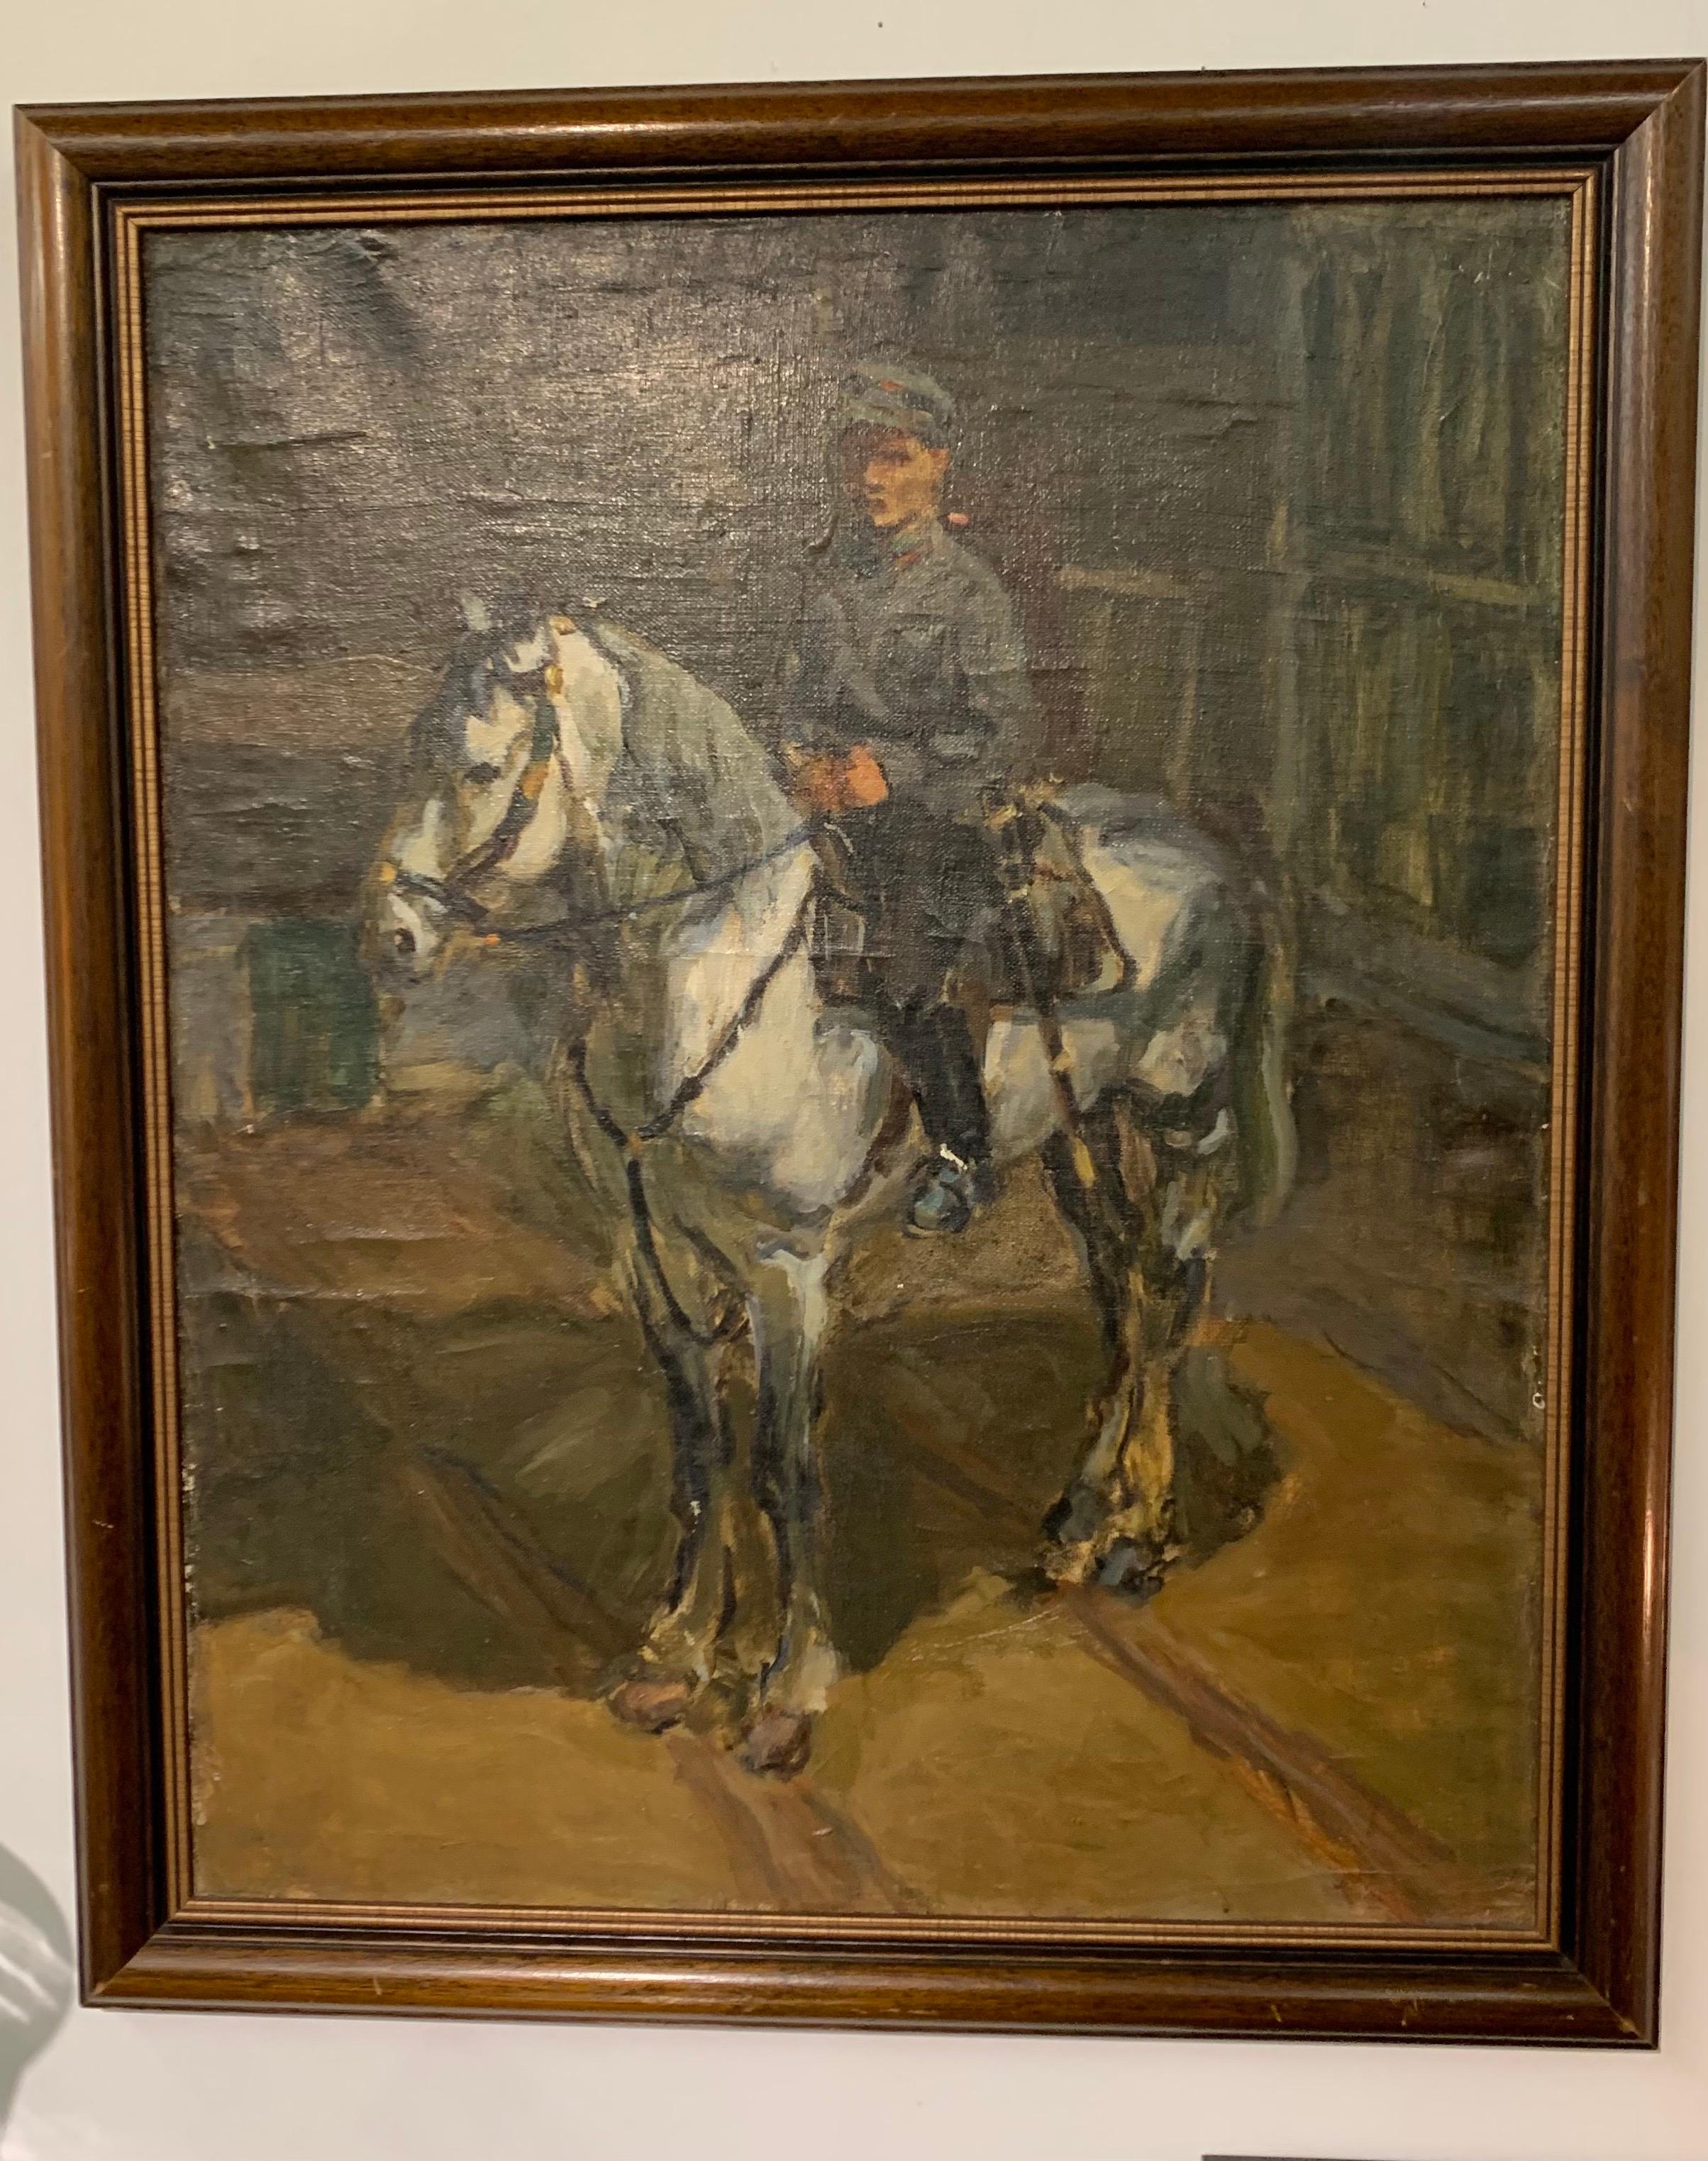 Original oil on canvas with signature on back of constable on horse. Age appropriate wear.
Wonderful craftsmanship. All original.